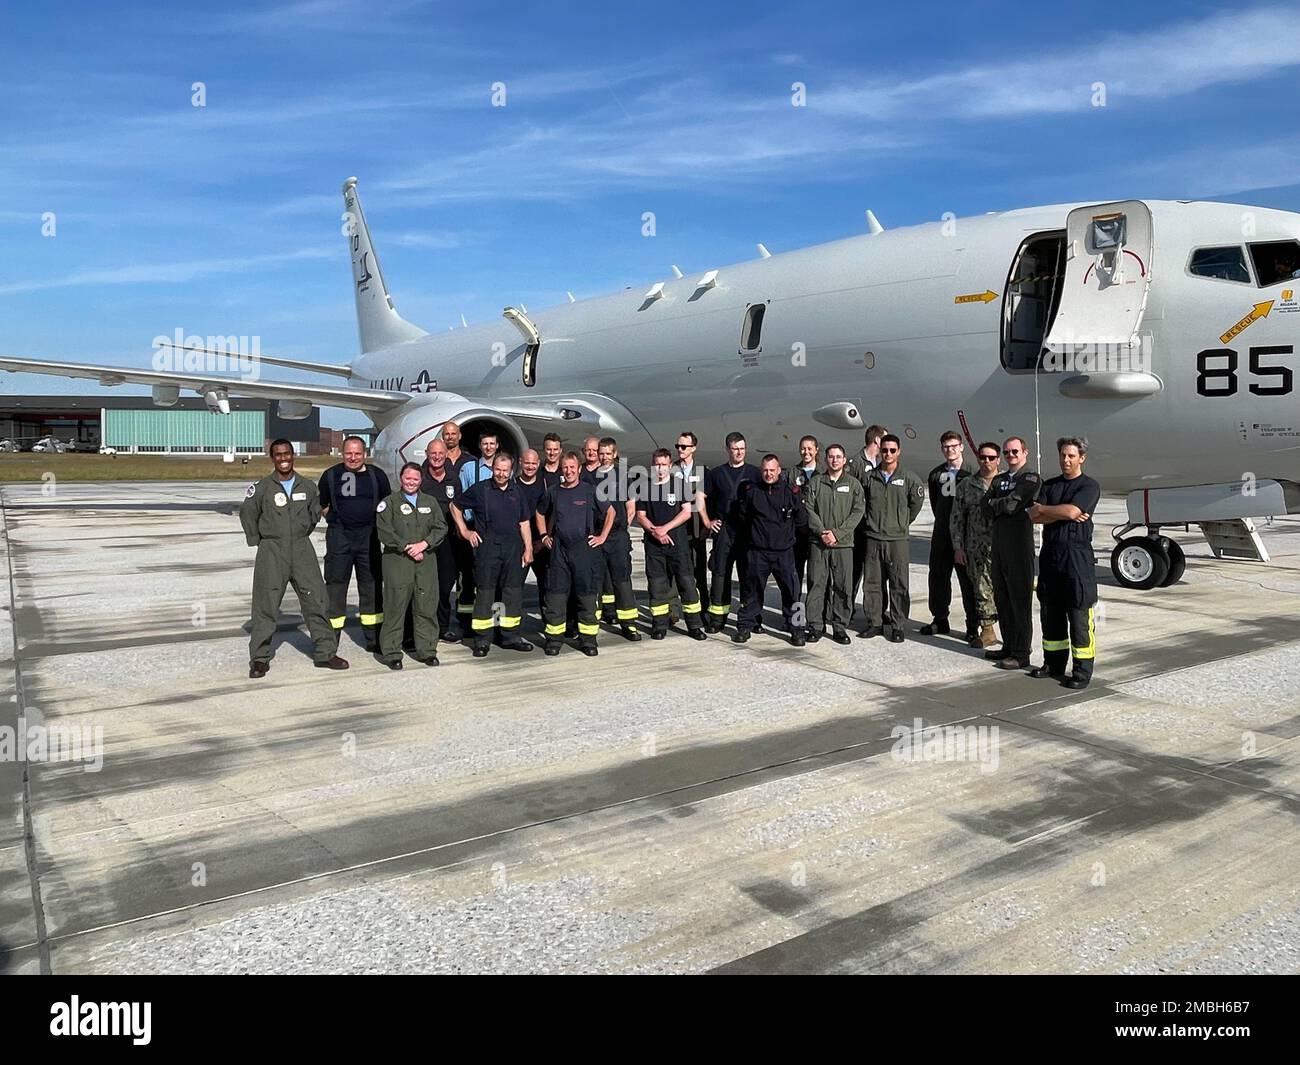 Members of Combat Air Crew Six (CAC-6) pose outside of the P-8A along with with members of the Nordholz Fire and Rescue Command. Stock Photo